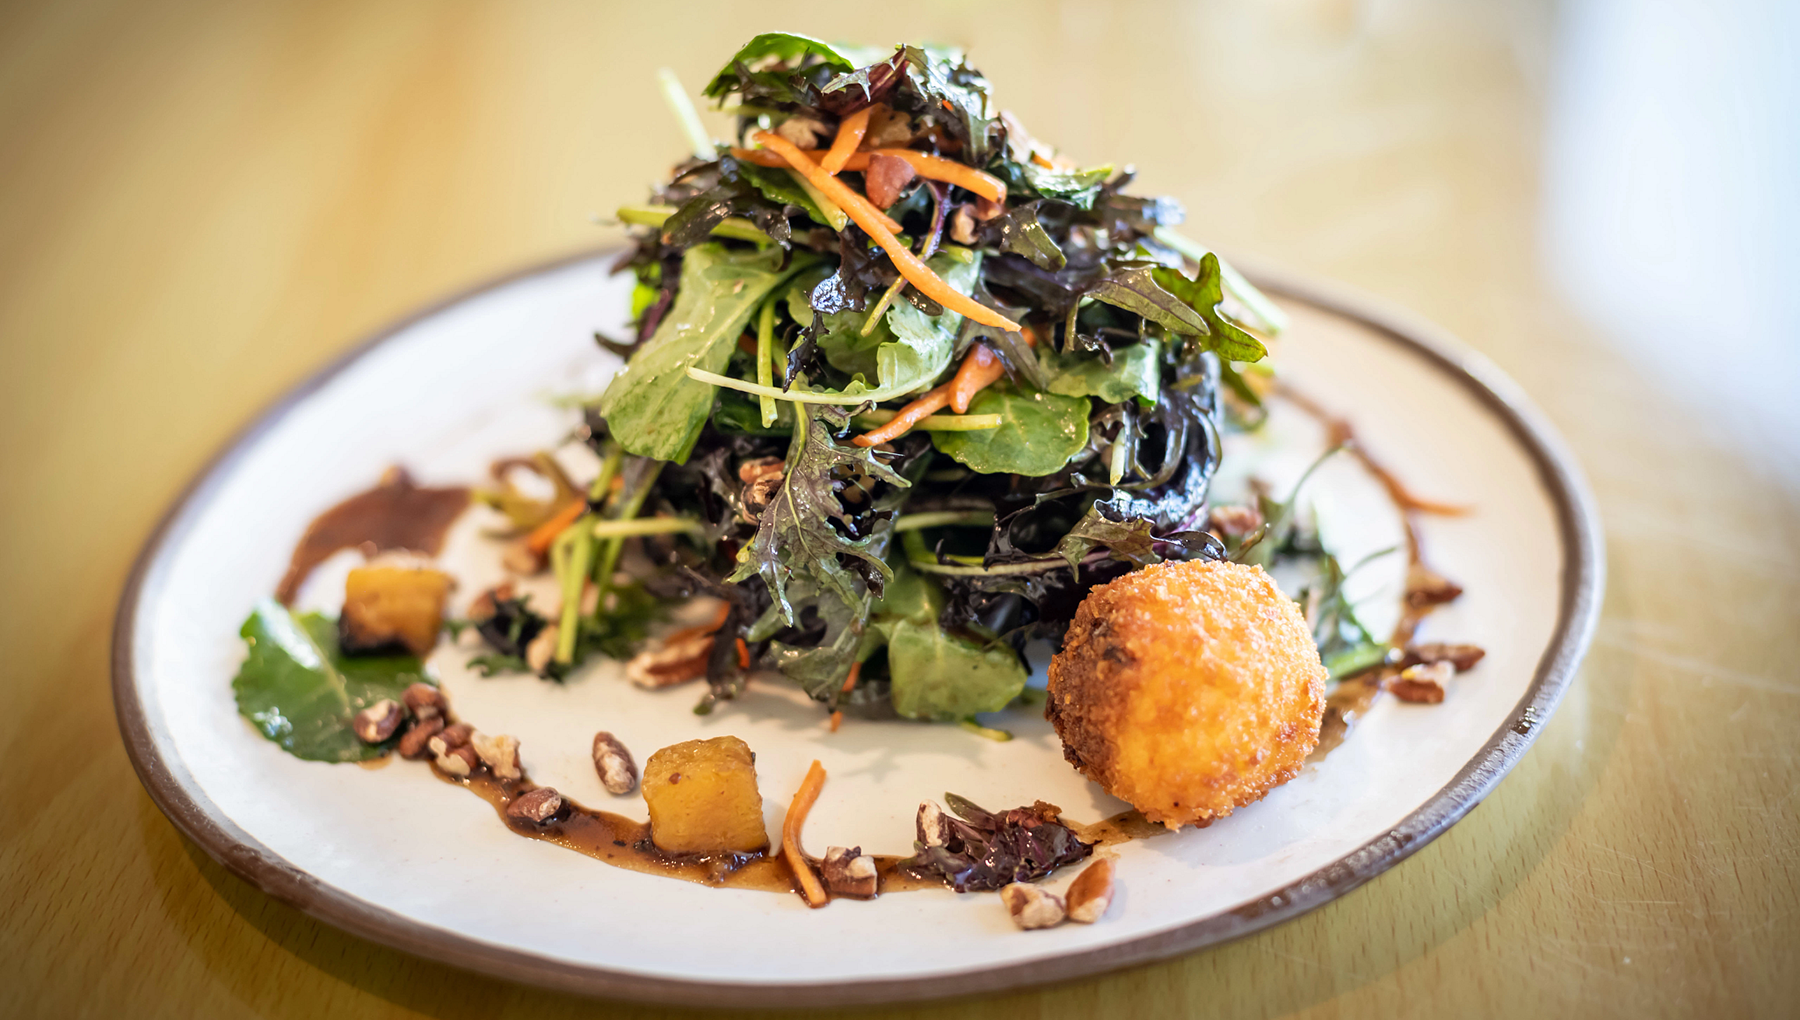 A kale salad is served at Last Chair Restaurant.